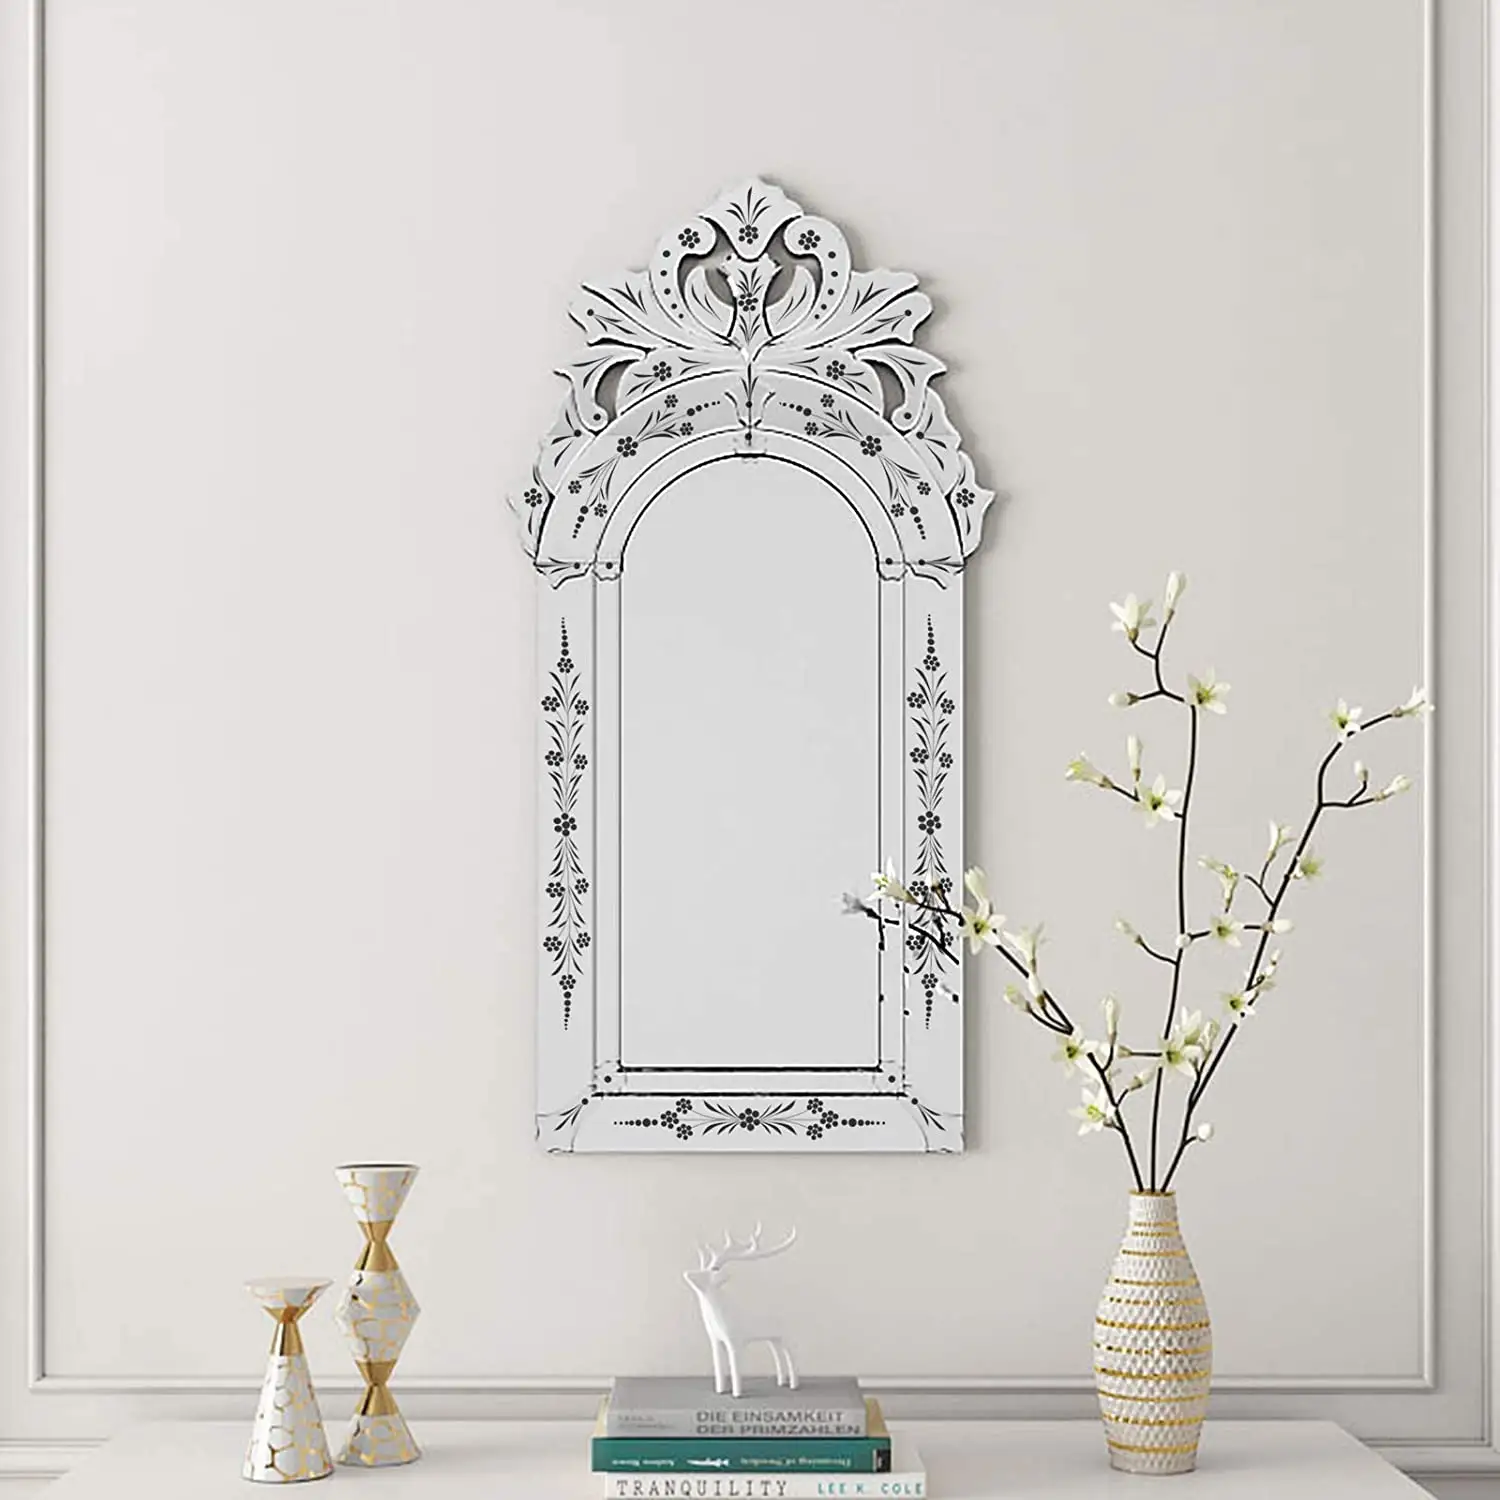 Ornate Rectangle Glass Accent Wall Mounted Venetian Mirror Home Decor 3d Wall Mirror for Living Room Bathroom